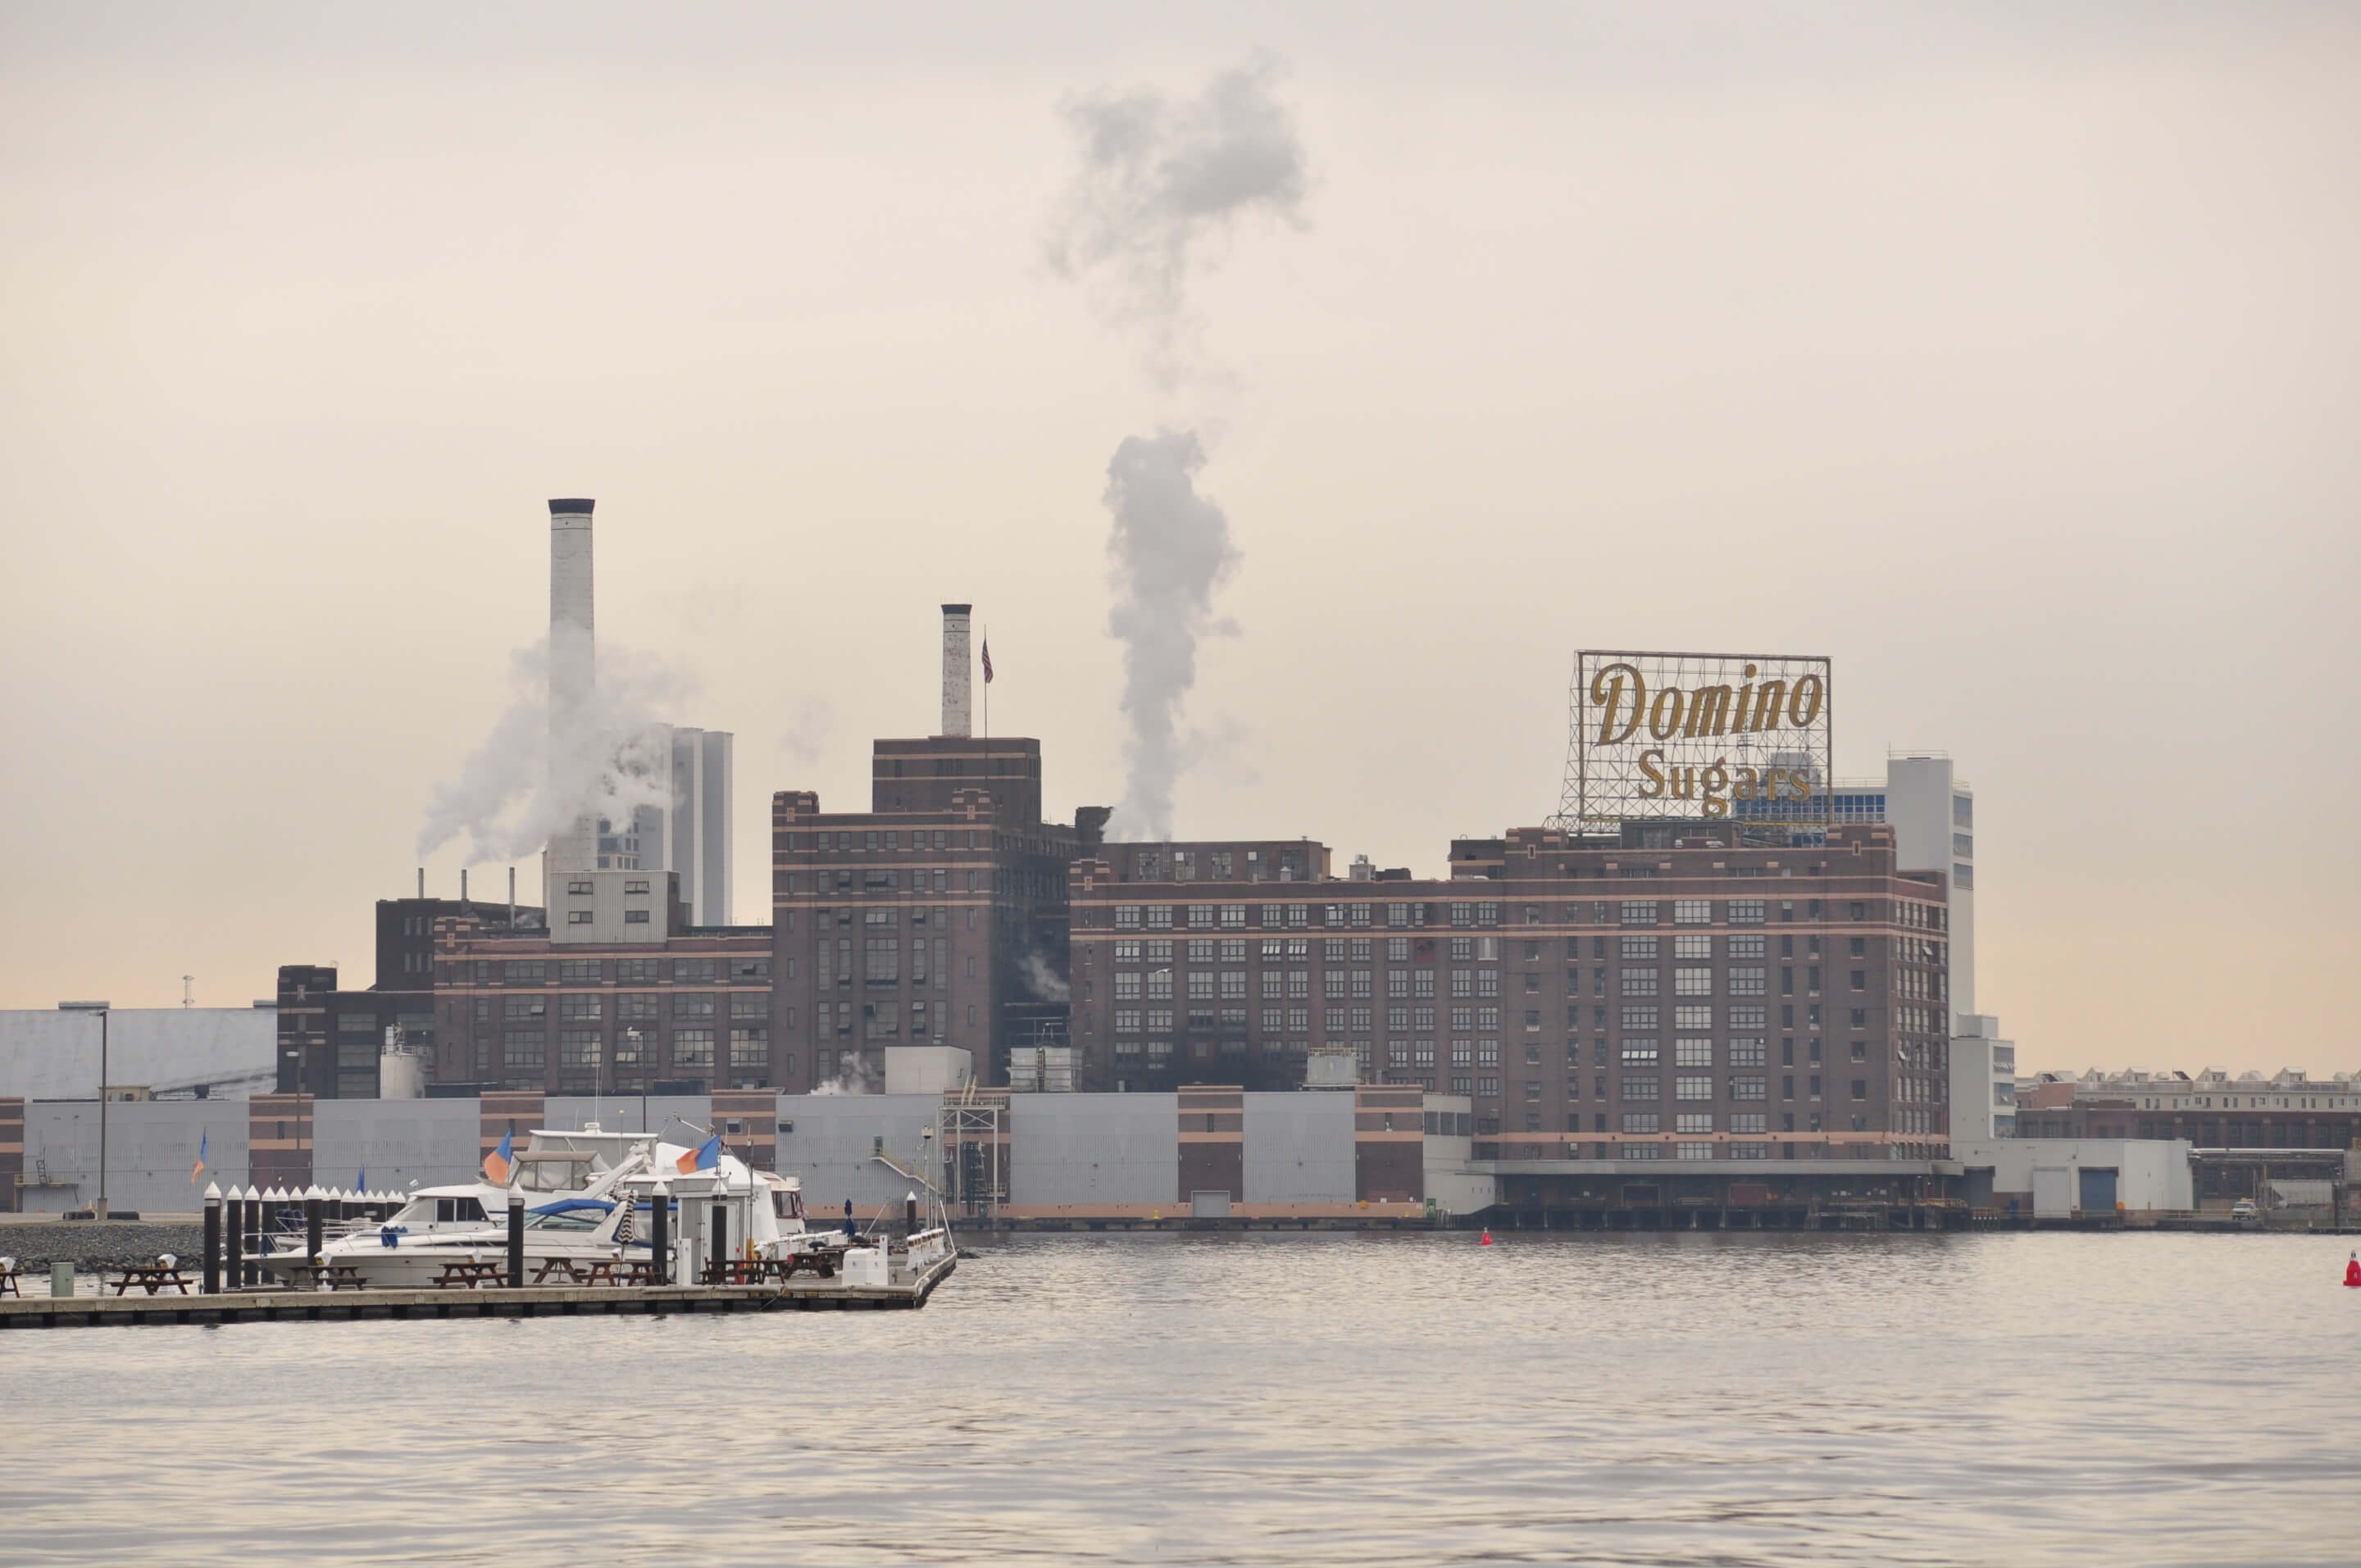 looking at a factory with the domino sugars sign from the harbor